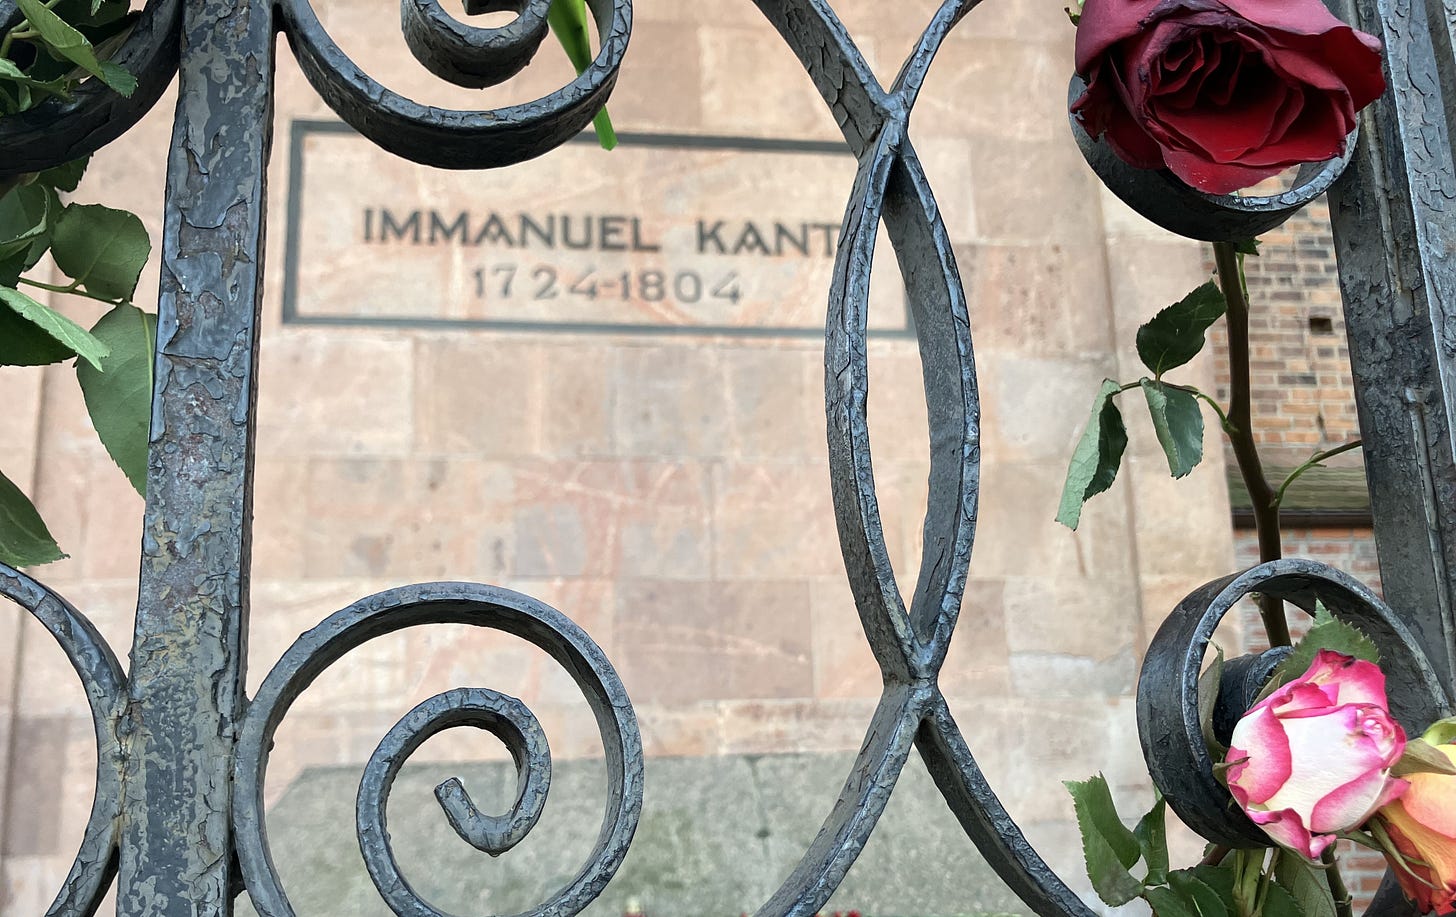 Flowers on Kant’s grave in Kaliningrad, Russia ahead of his 300th birthday. (Photo by Andre Ballin/Picture Alliance via Getty Images.)